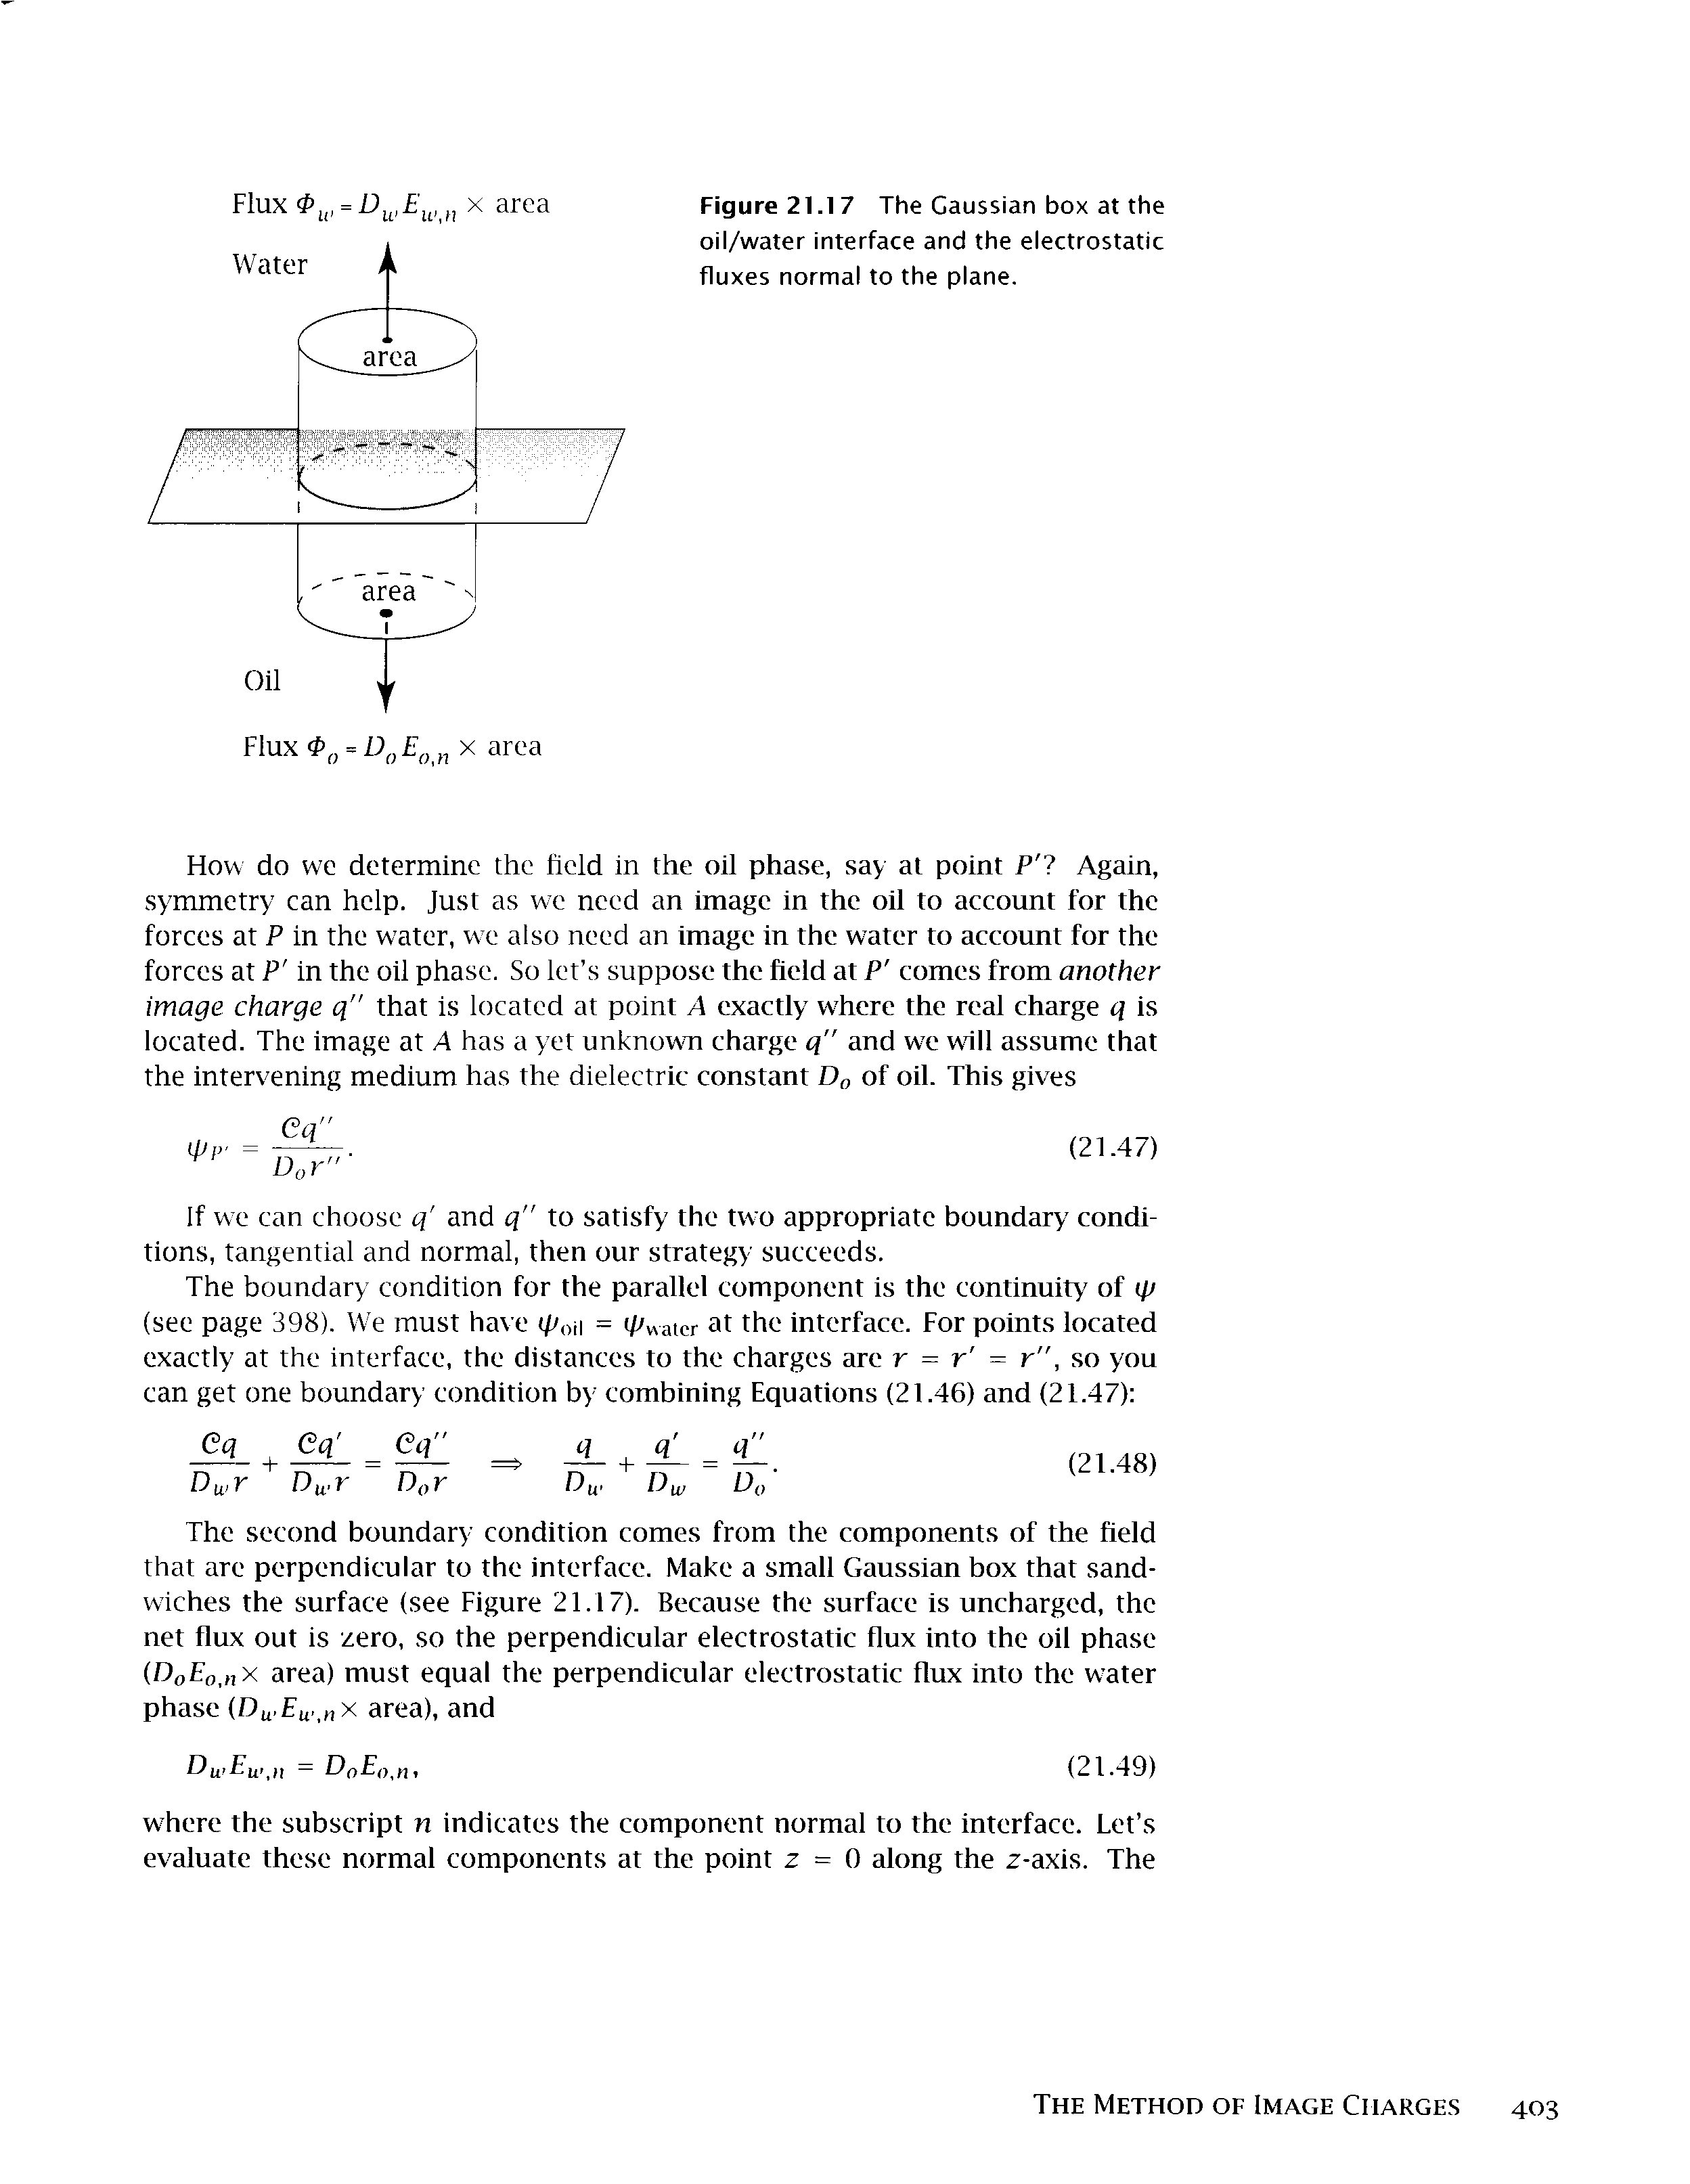 Figure 21.17 The Gaussian box at the oil/water interface and the electrostatic fluxes normal to the plane.